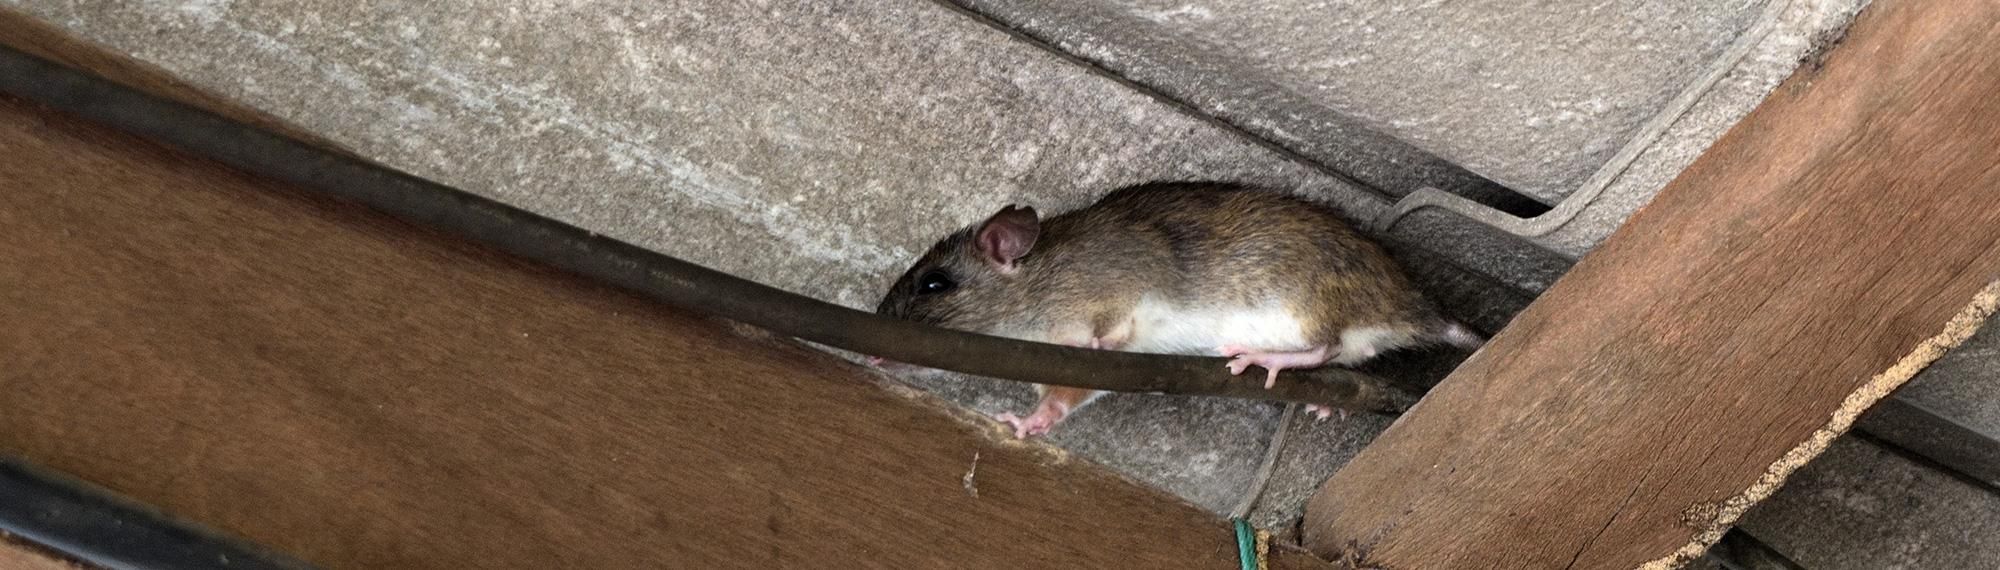 roof rat crawling in the rafters